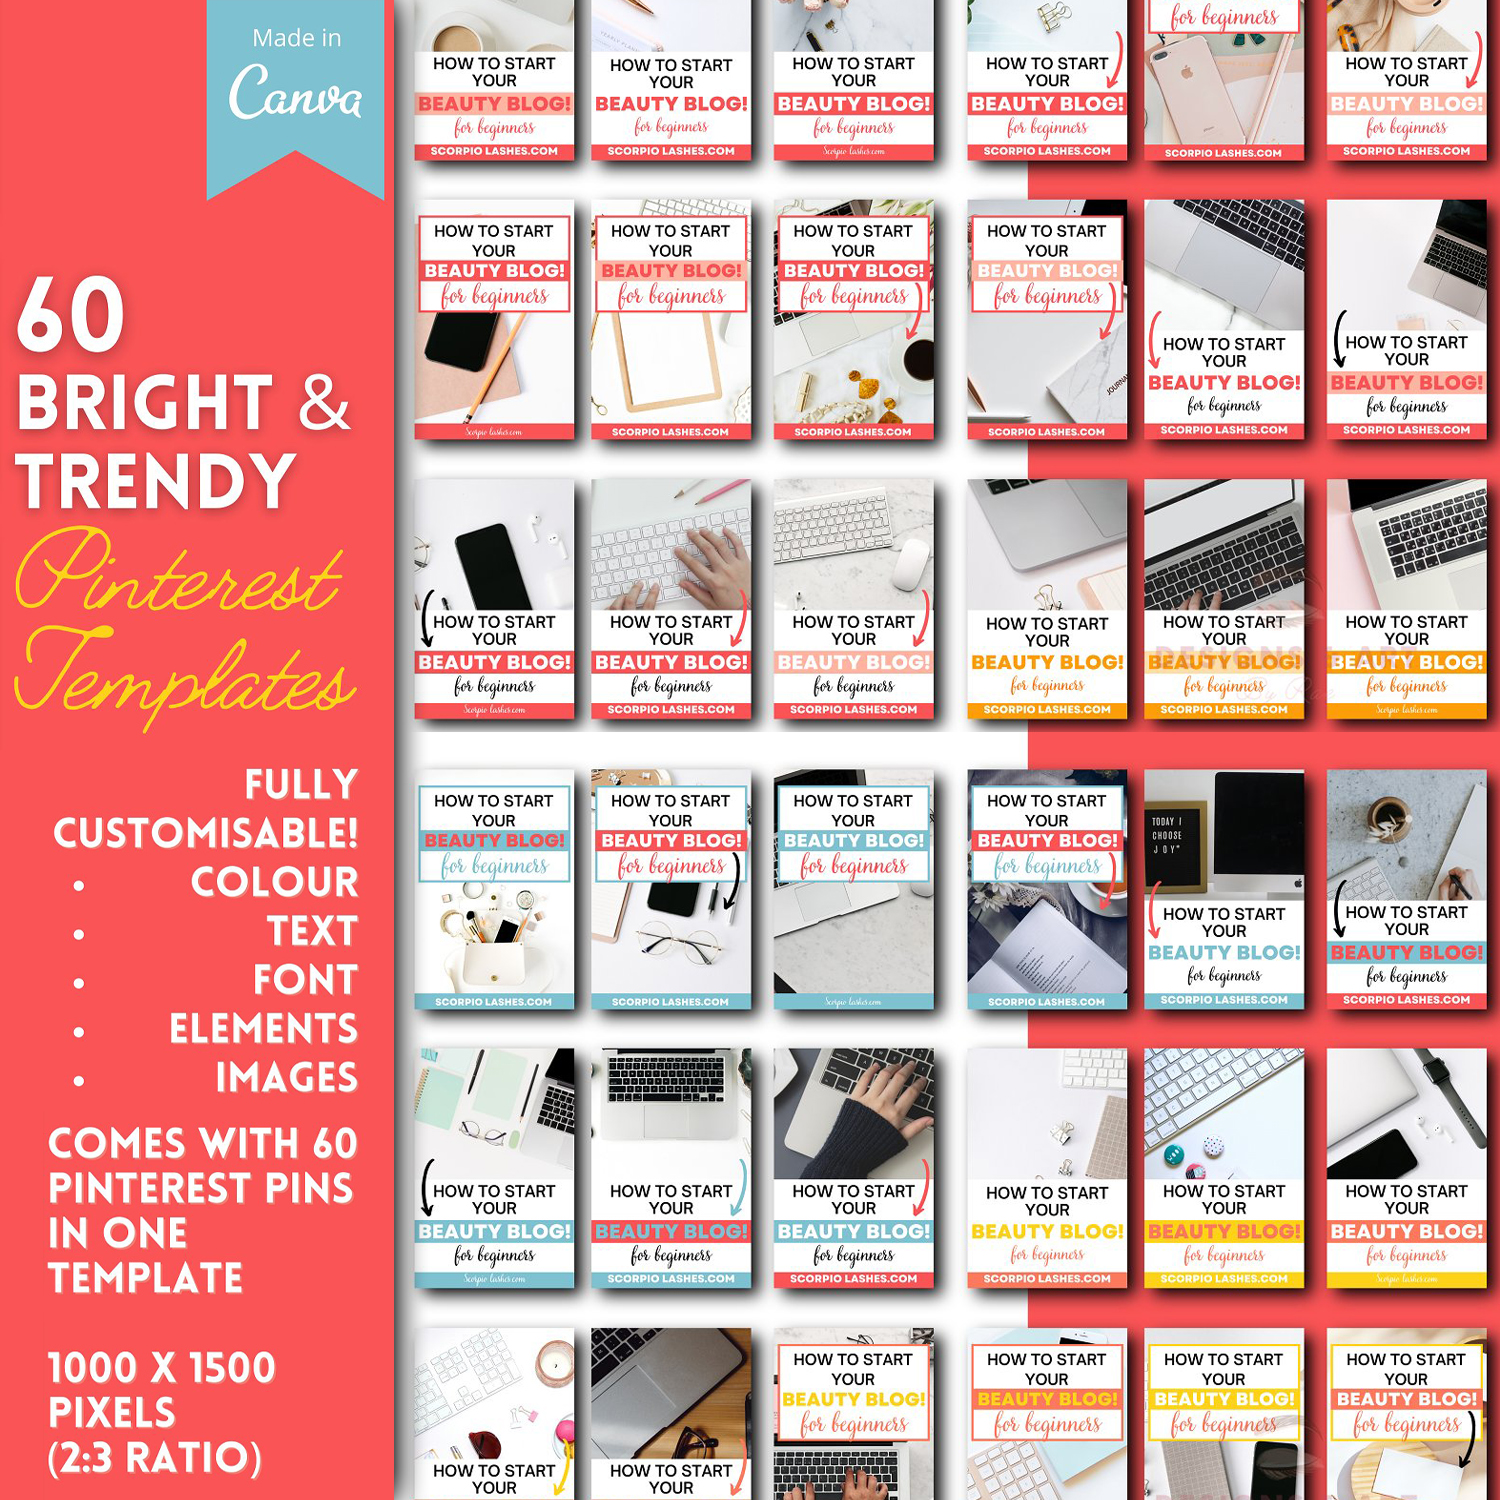 Preview trendy bright pinterest templates.